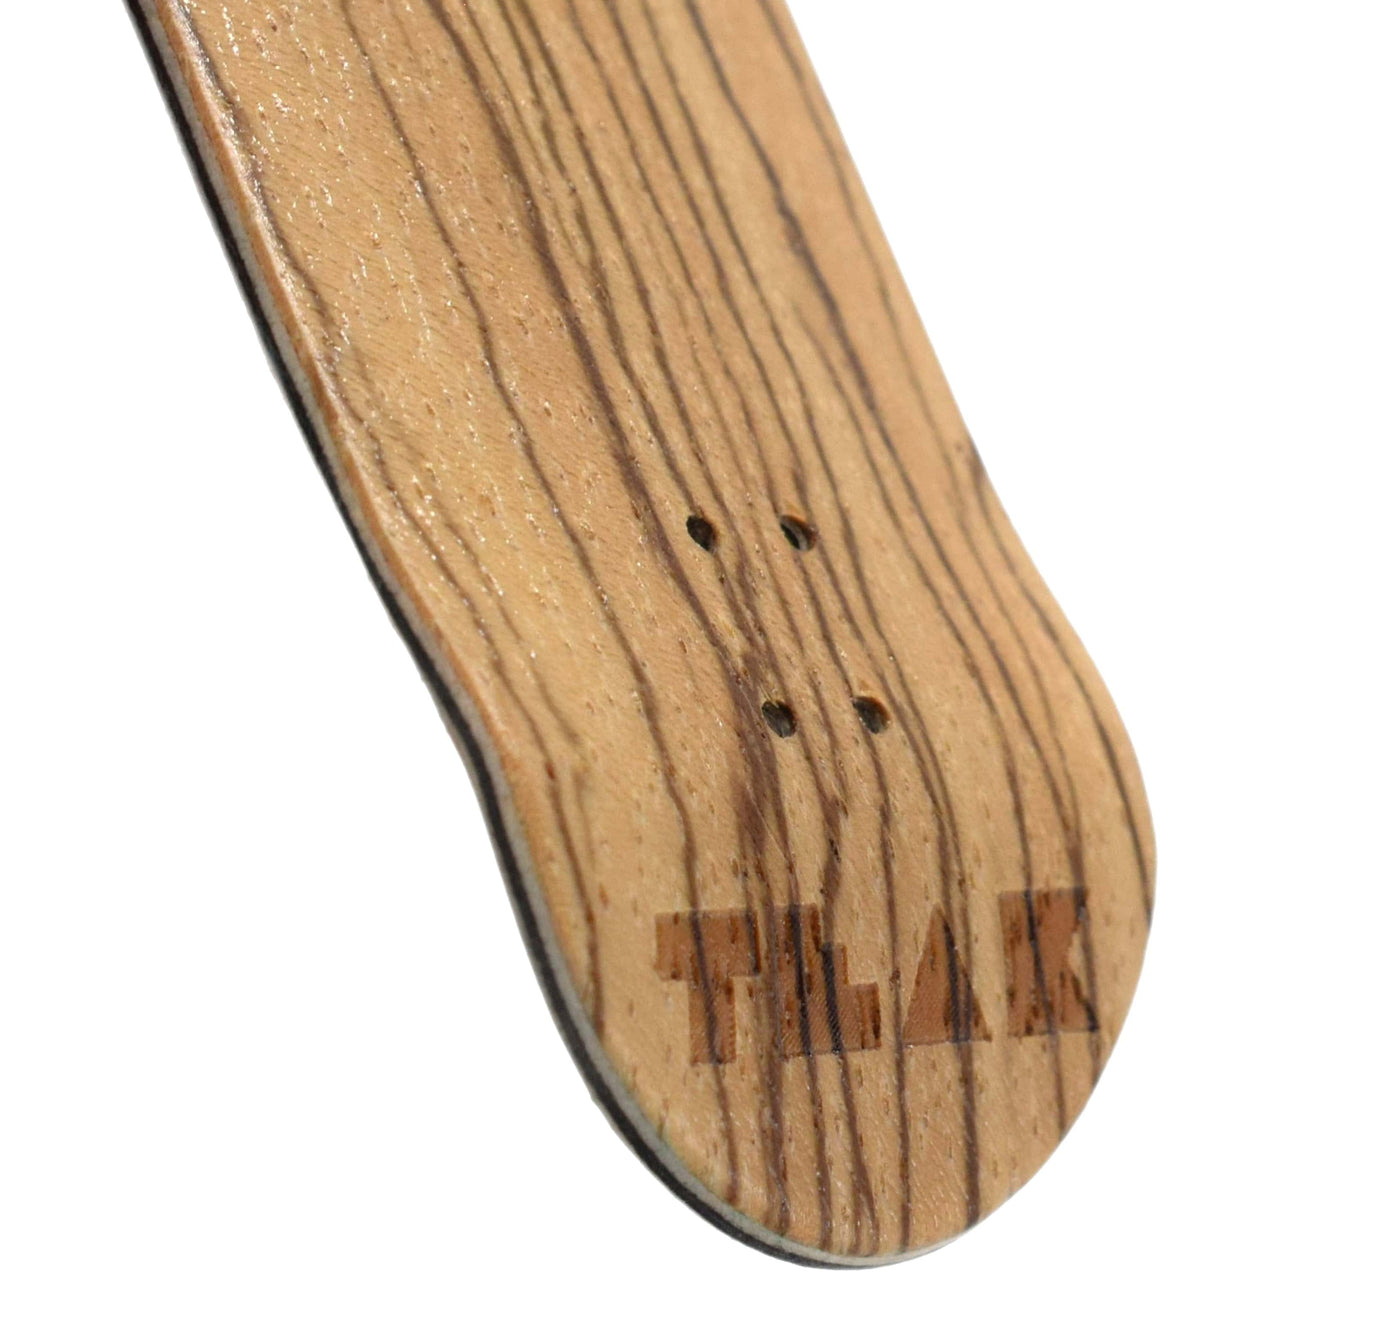 Teak Tuning PROlific Wooden 5 Ply Fingerboard Deck 32x95mm - The Classic - with Color Matching Mid Ply